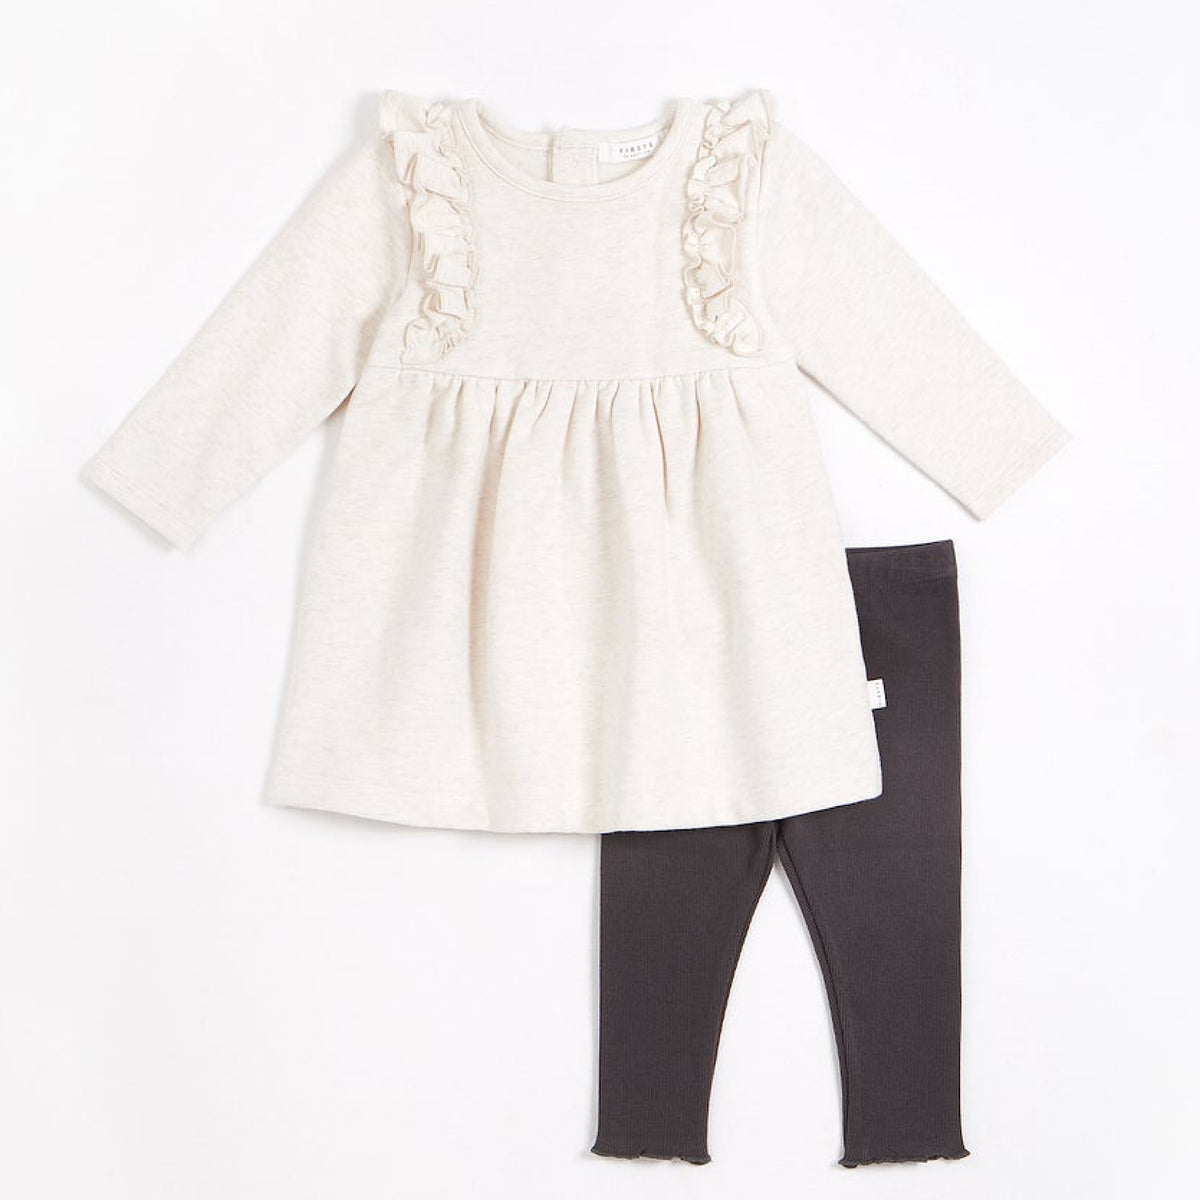 Oatmeal Ruffled Dress with Charcoal Leggings, 2 Pieces